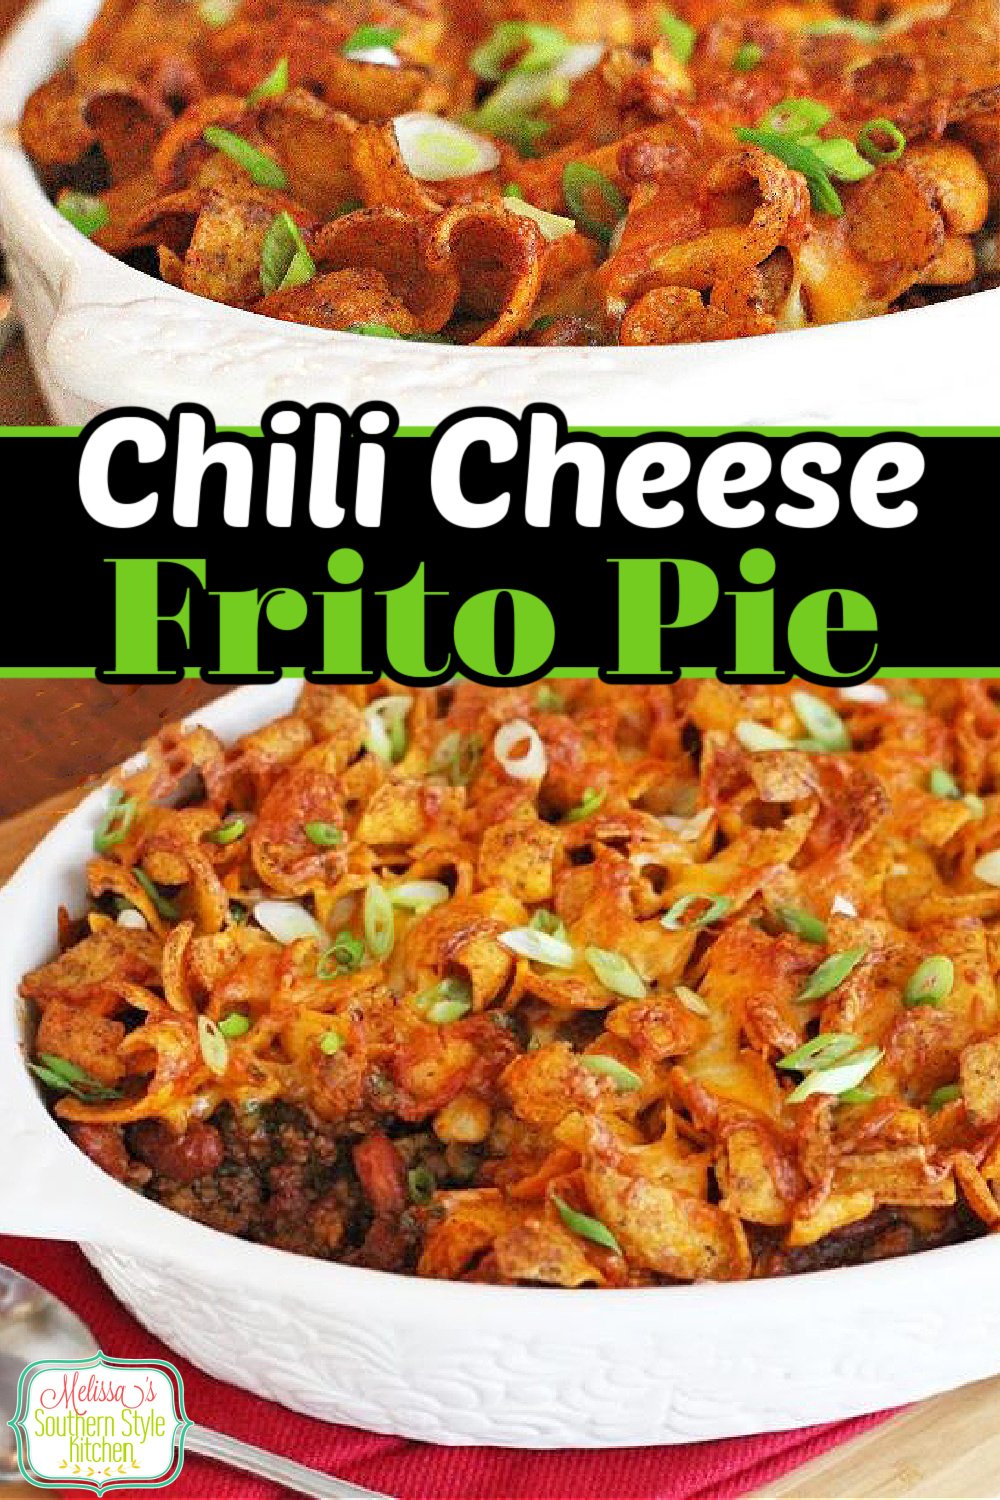 Enjoy this Chili Cheese Frito Pie topped with a dollop of sour cream and sprinkling of green onions #fritopie #chilicheesefritopie #fritos #chili #easygroundbeefrecipes #dinner #beef #hamburger #dinnerrecipes #southernfood #southernrecipes via @melissasssk